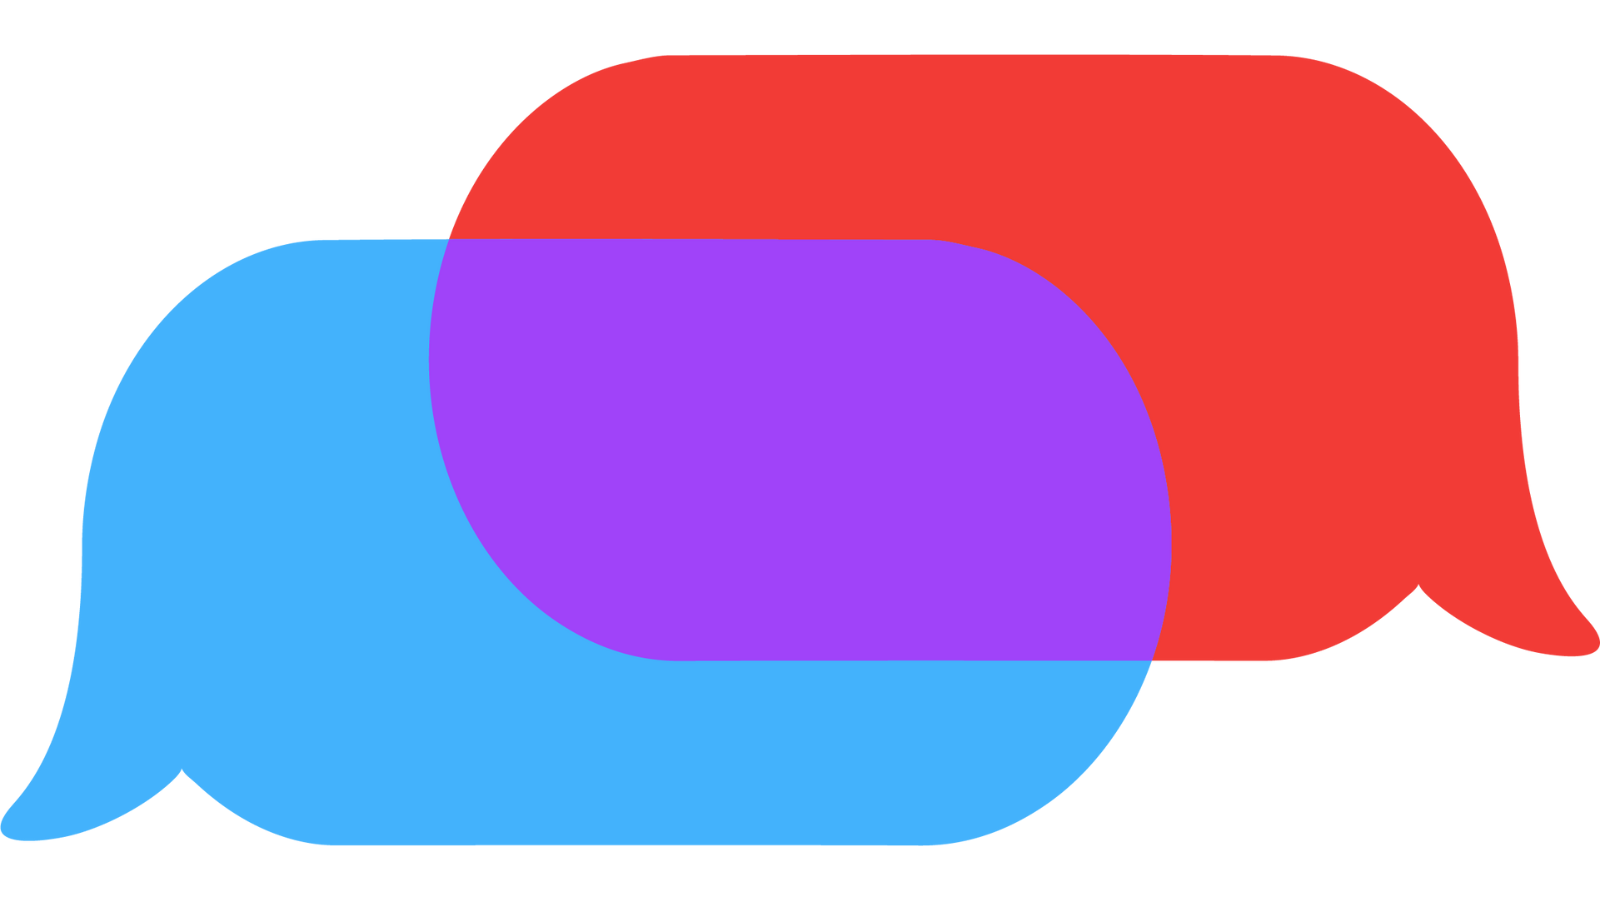 Red and blue overlapping speech bubbles.